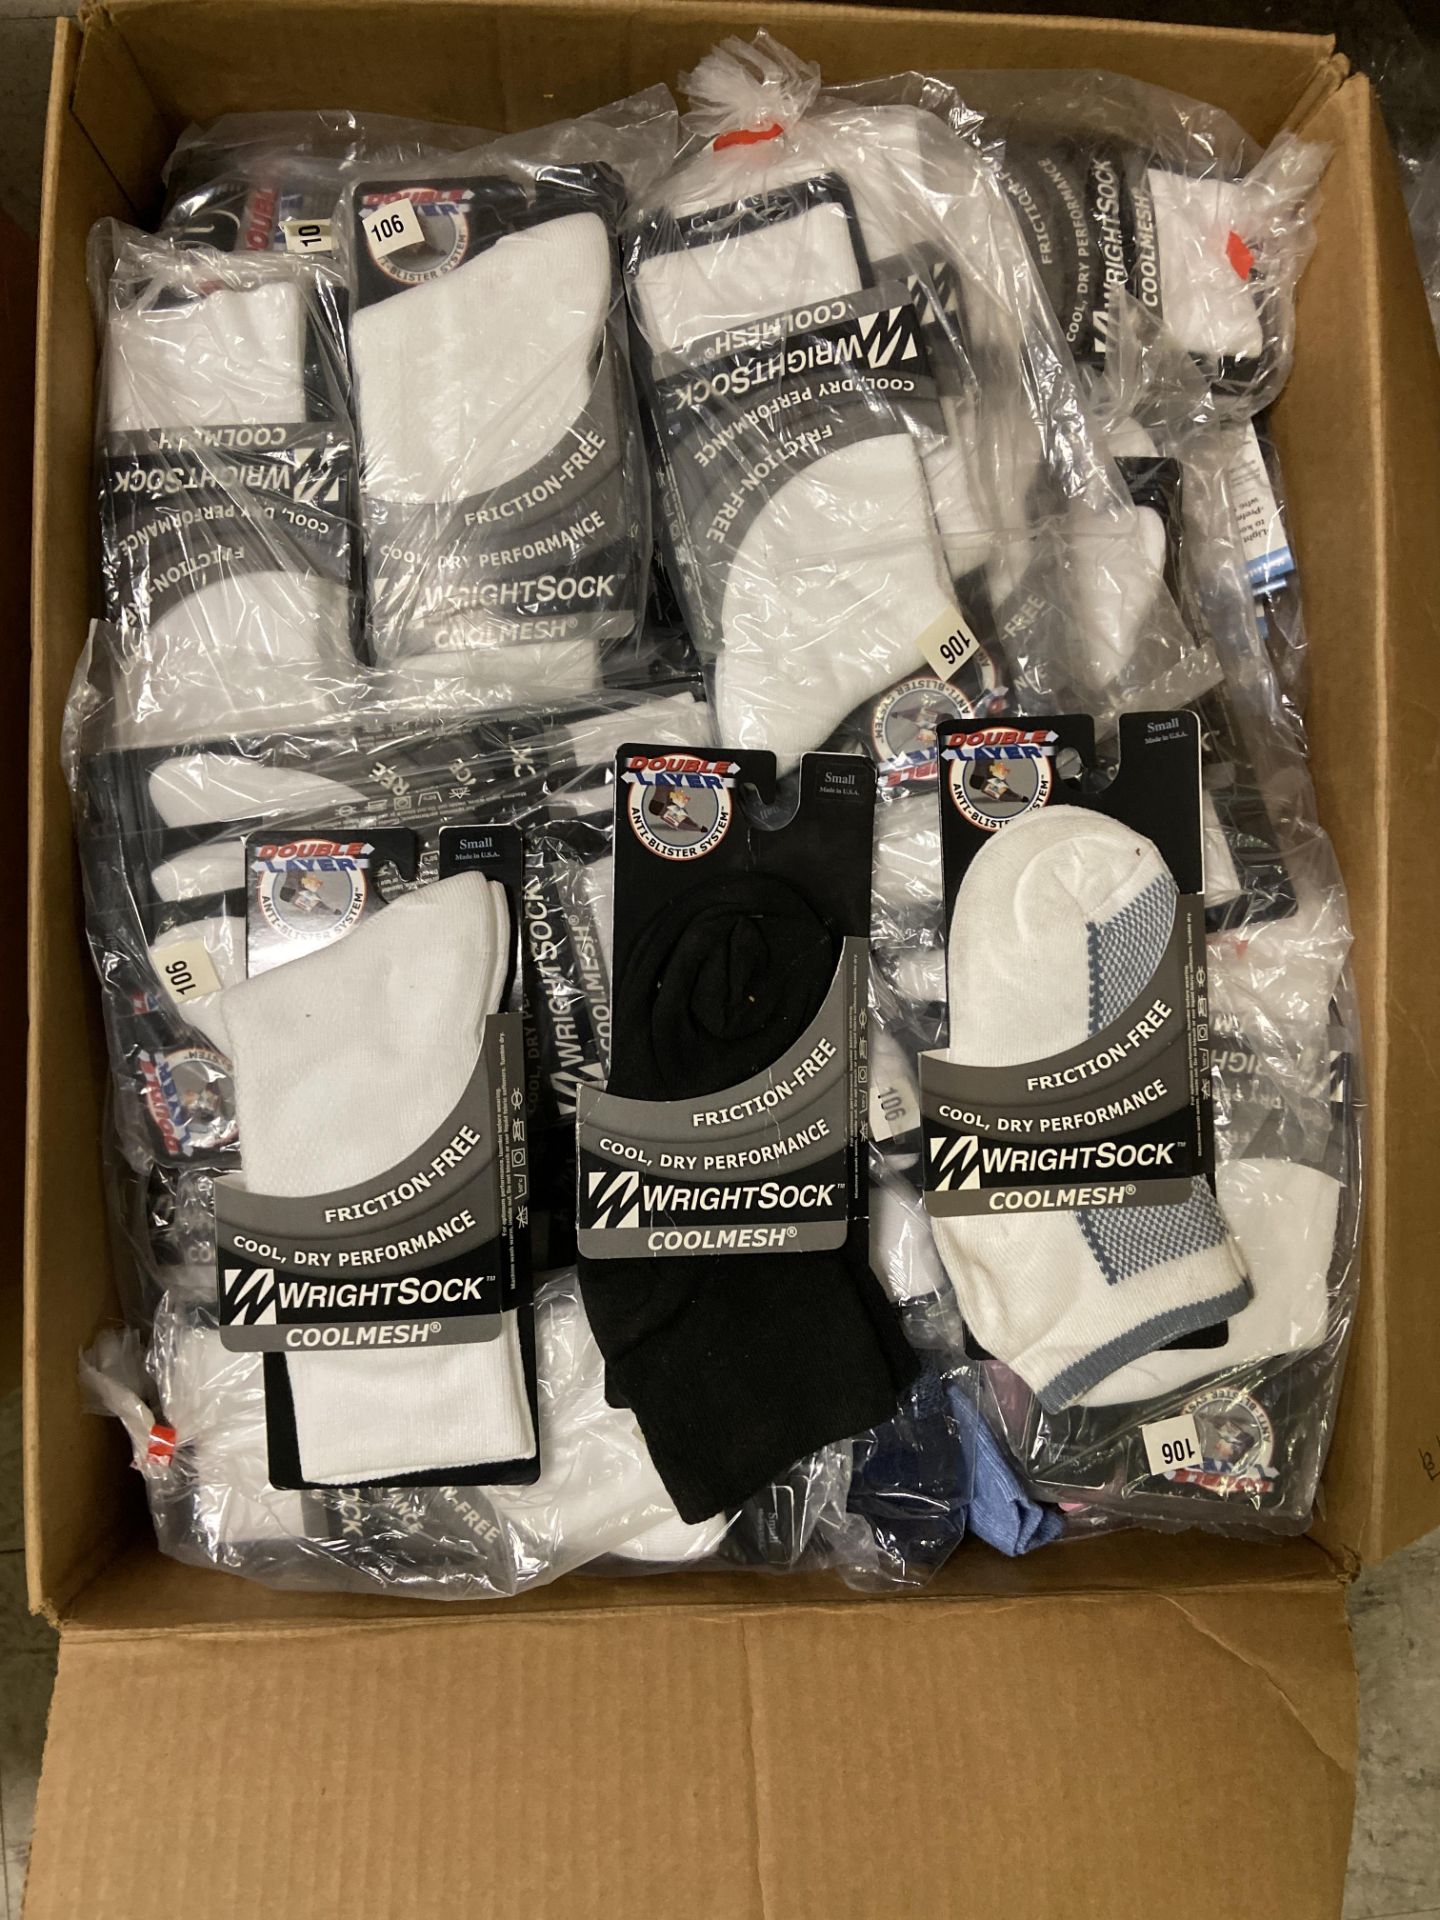 500+ packs of New Socks, Wrightsocks Various Styles, Various Colors and Styles - Image 5 of 6